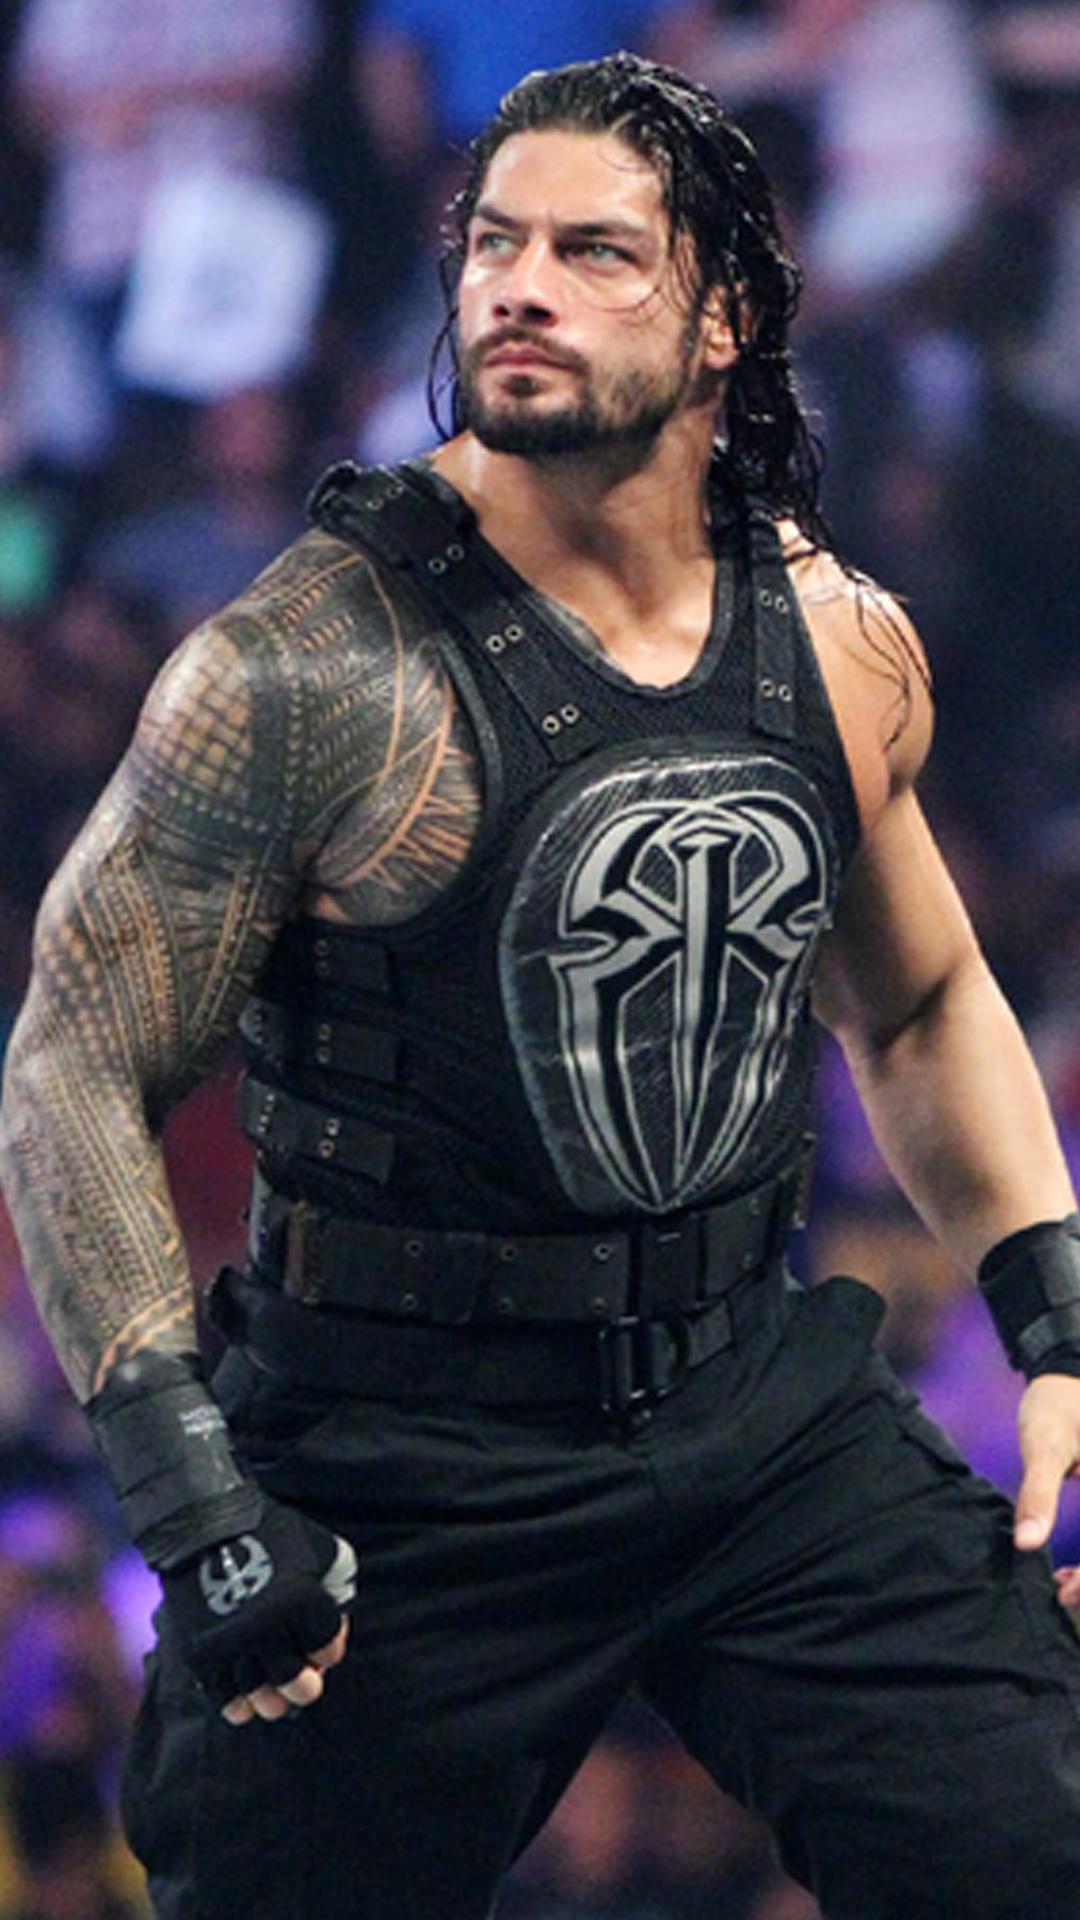 Free download COOGLED WWE WRESTLER ROMAN REIGNS HD WALLPAPERS 660x431 for  your Desktop Mobile  Tablet  Explore 49 Roman Reigns Wallpaper HD 2014   WWE Roman Reigns Wallpaper Roman Reigns Wallpaper